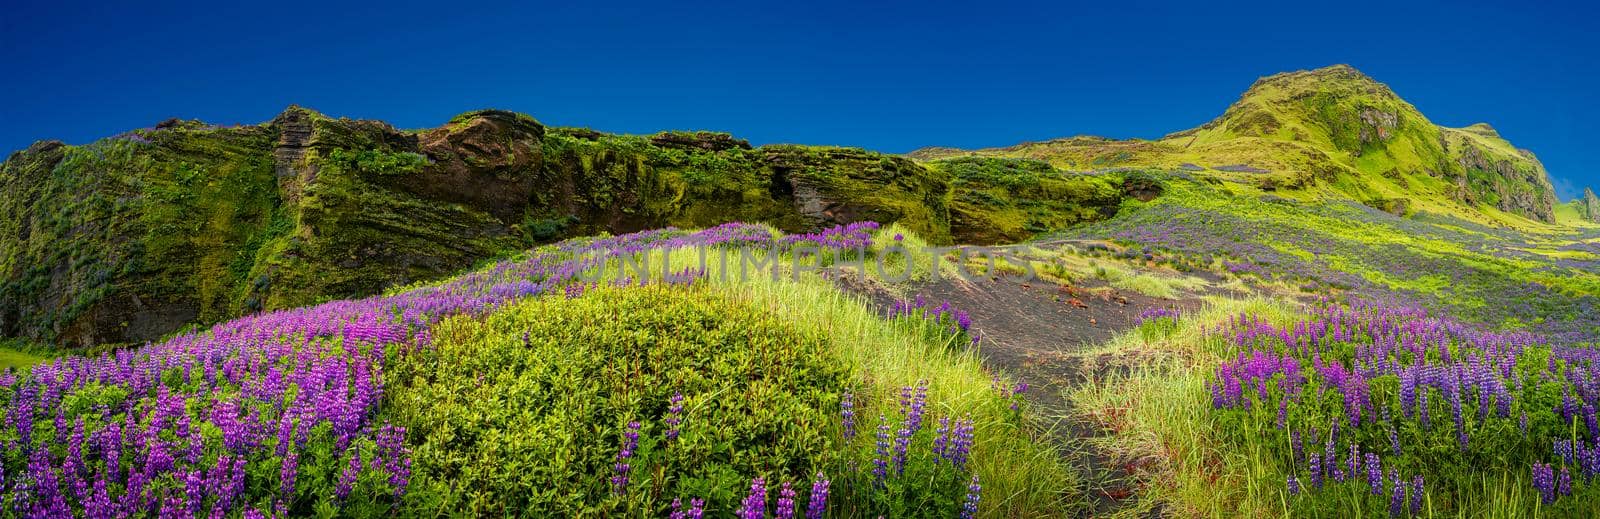 Panoramic view over rough and colorful landscape in Iceland with lupin meadow field, early summer by neurobite